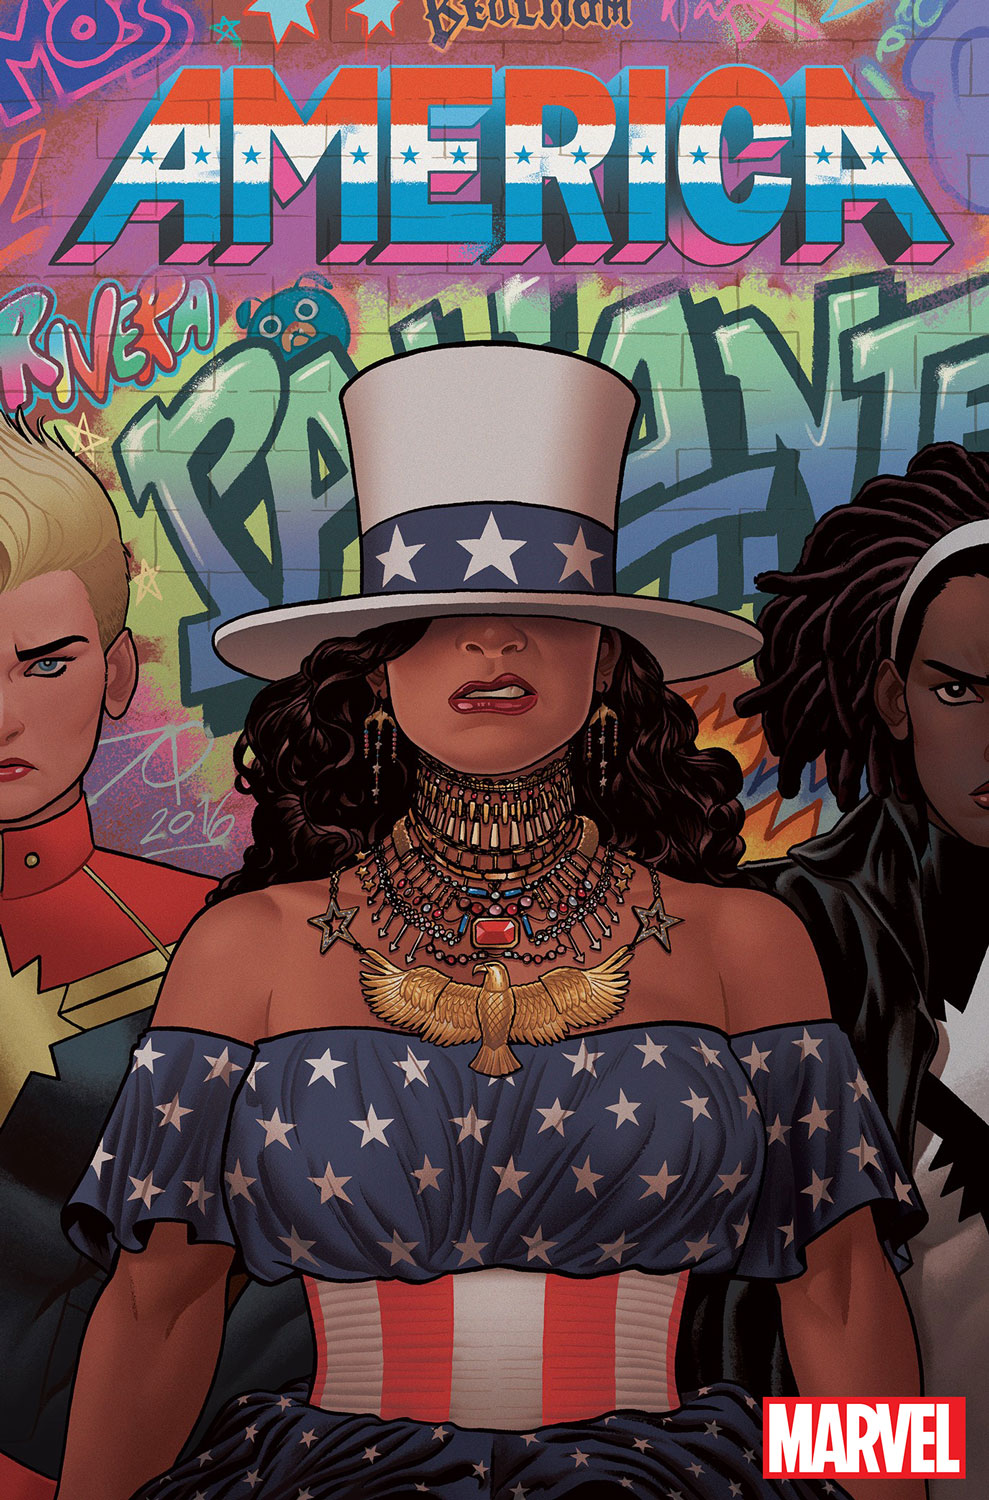 This Marvel comic book cover is a tribute to one of Lemonade's most iconic images. ((Credit: Joe Quinones/Marvel))